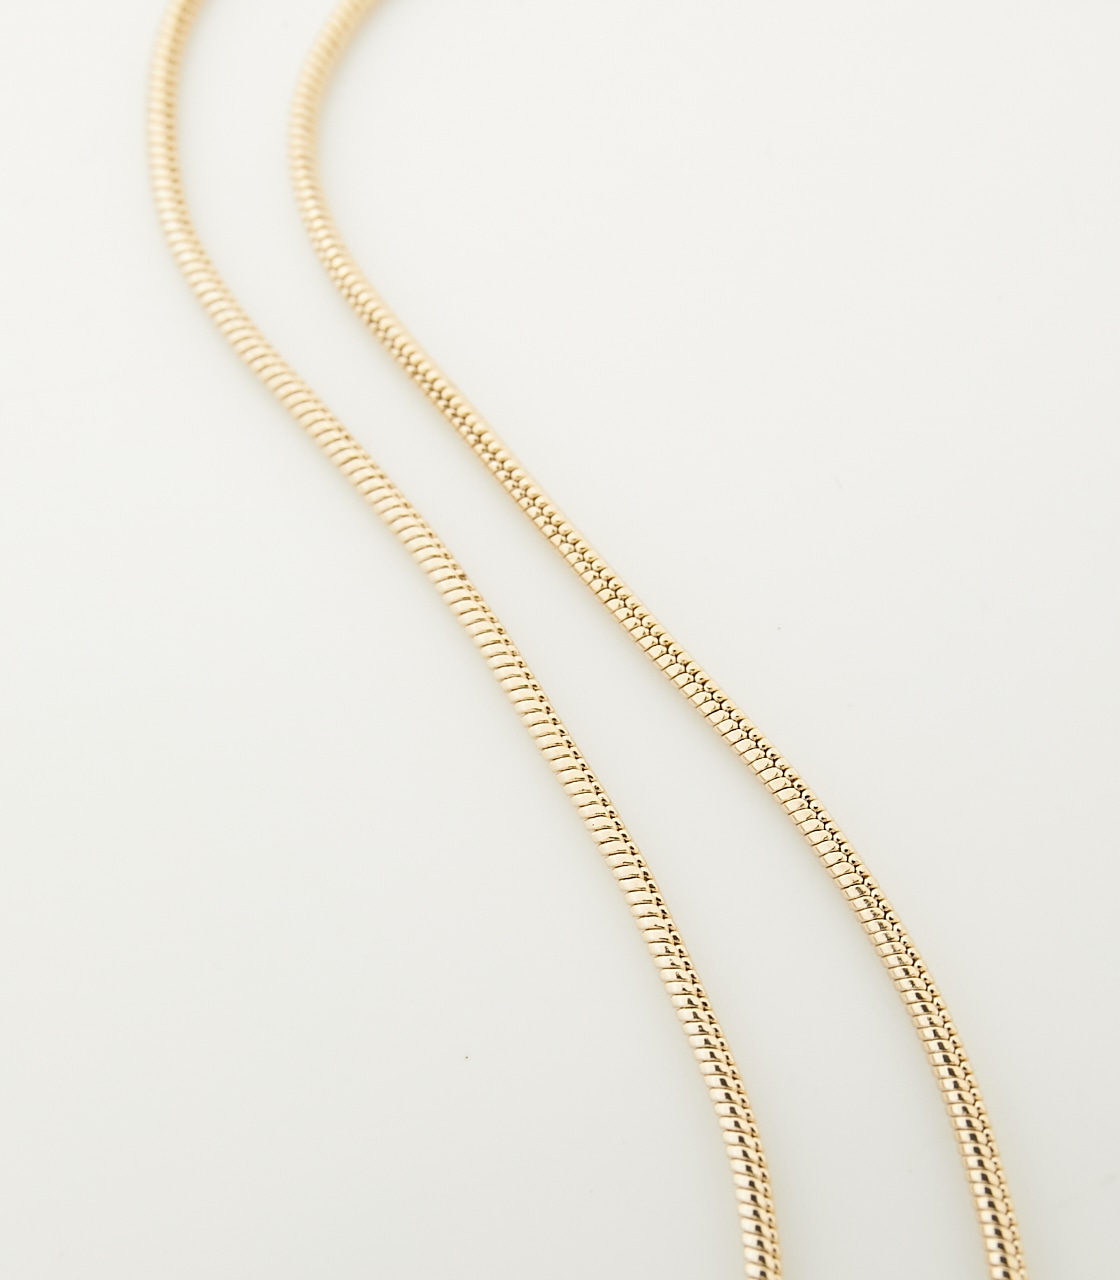 SYMMETRY CHAIN NECKLACE/シンメトリーチェーンネックレス 詳細画像 L/GLD 5